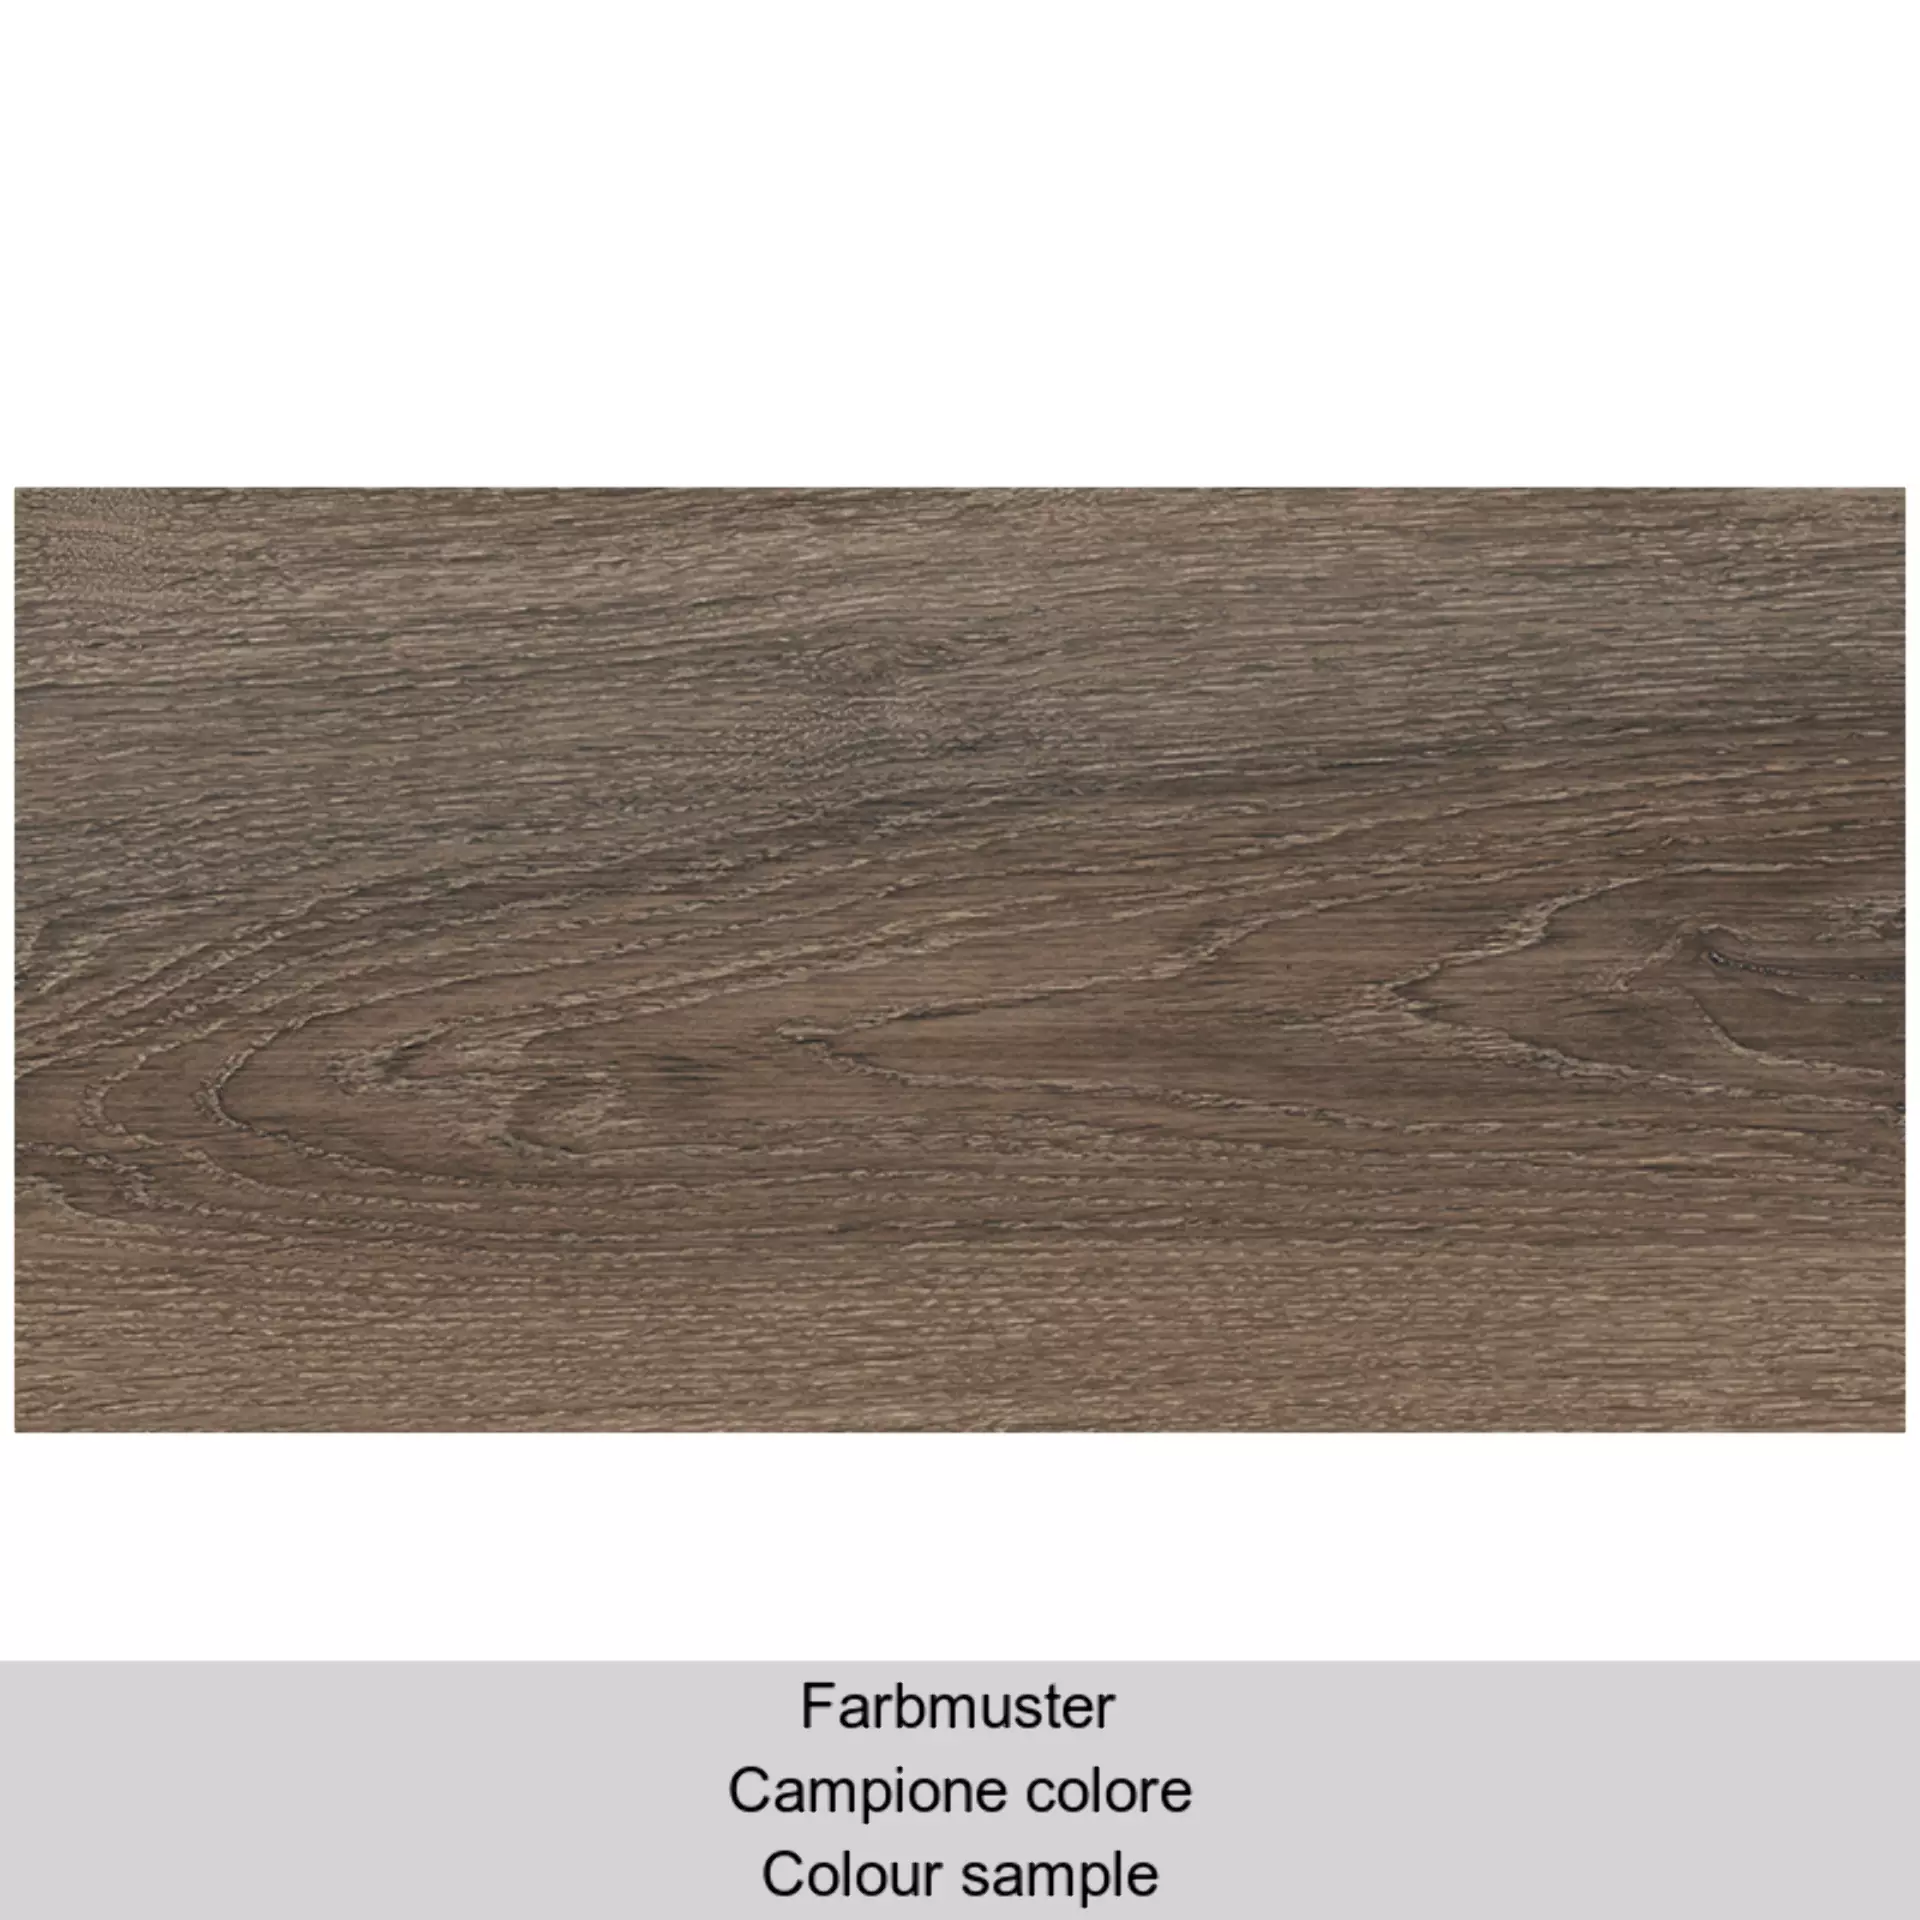 ABK Eco-Chic Brown Naturale Mix Sizes PF60006774 30x60cm rectified 8,5mm